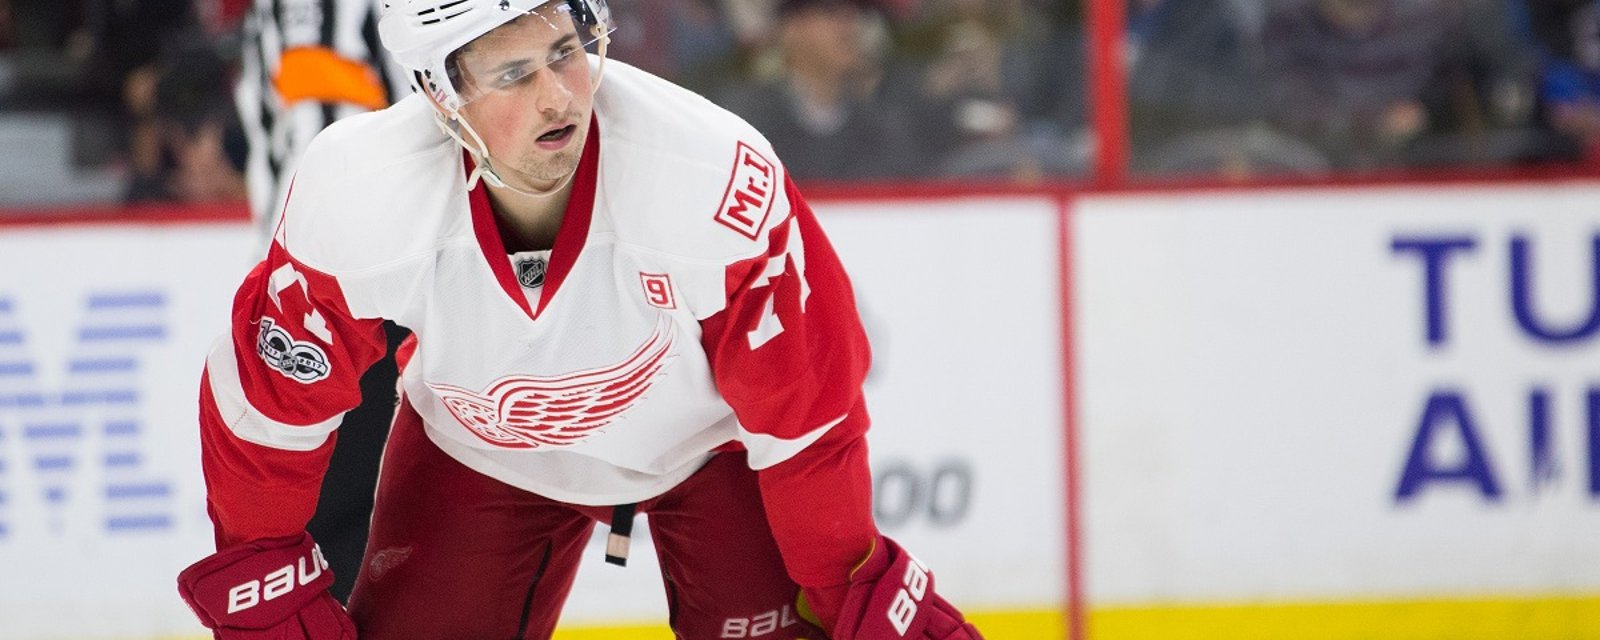 Dylan Larkin feels he is ready to become captain of the Detroit Red Wings.